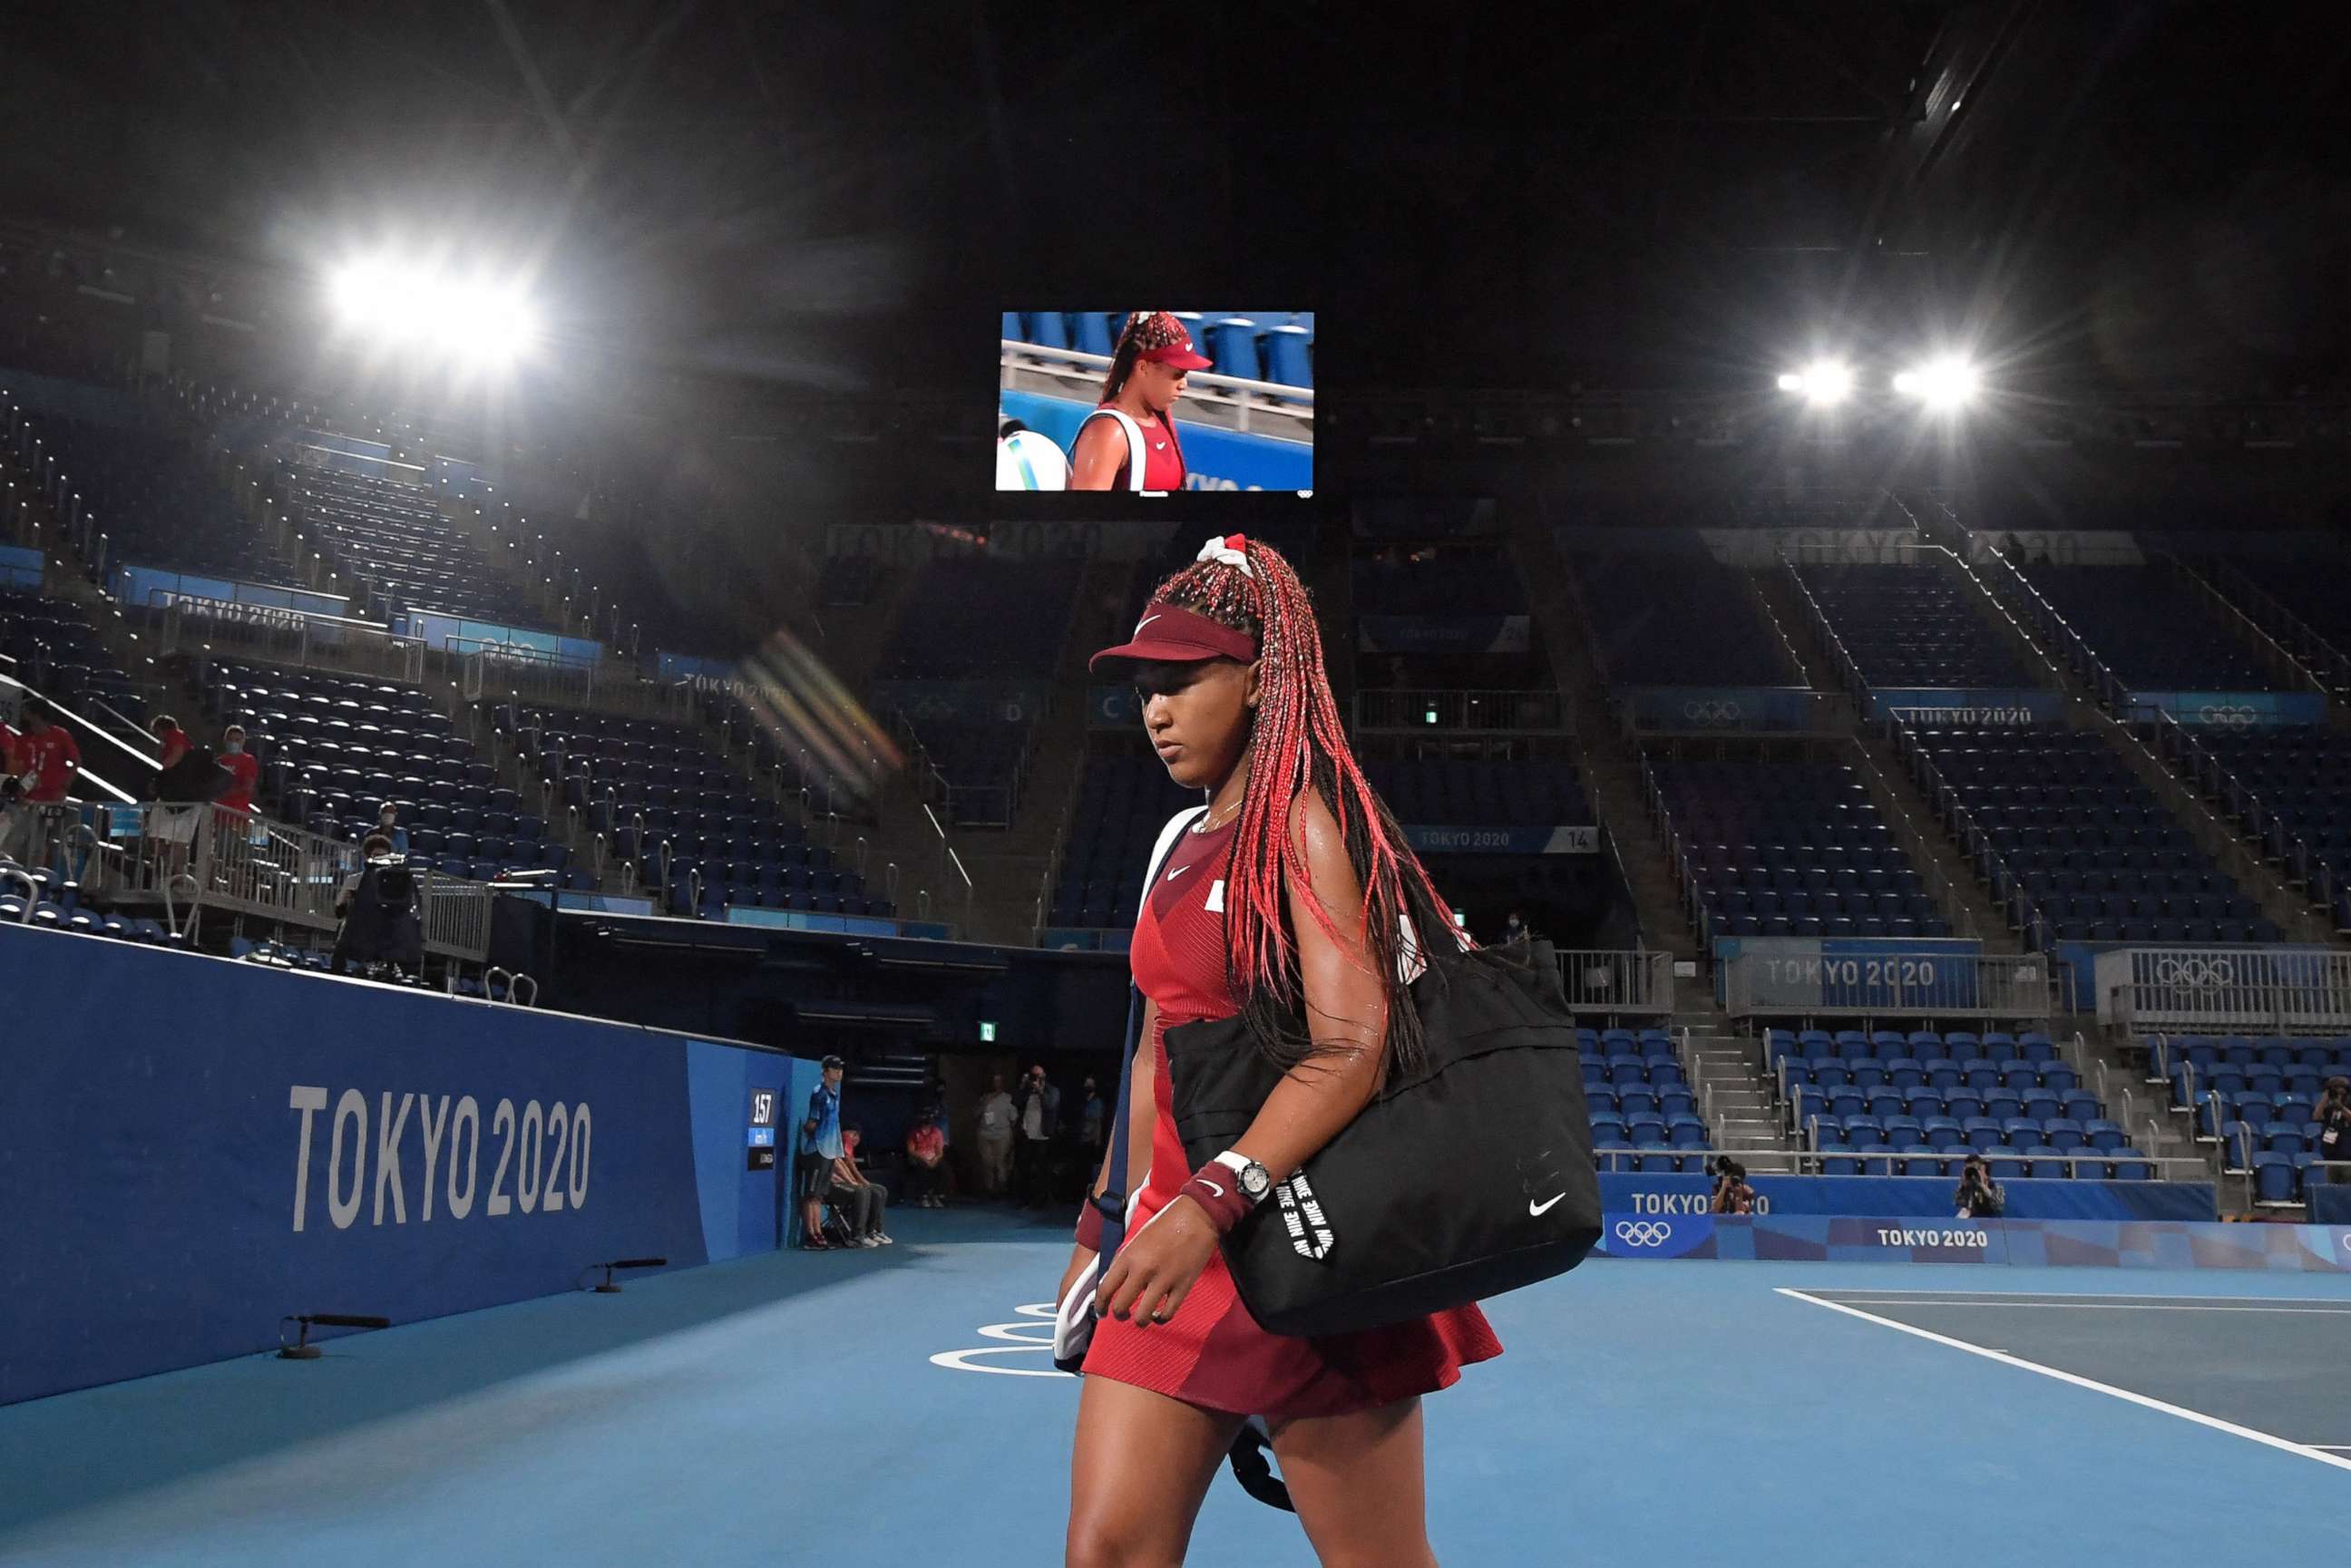 PHOTO: Japan's Naomi Osaka leaves the court after being beaten by Czech Republic's Marketa Vondrousova in their Tokyo 2020 Olympic Games women's singles third round tennis match at the Ariake Tennis Park in Tokyo on July 27, 2021.